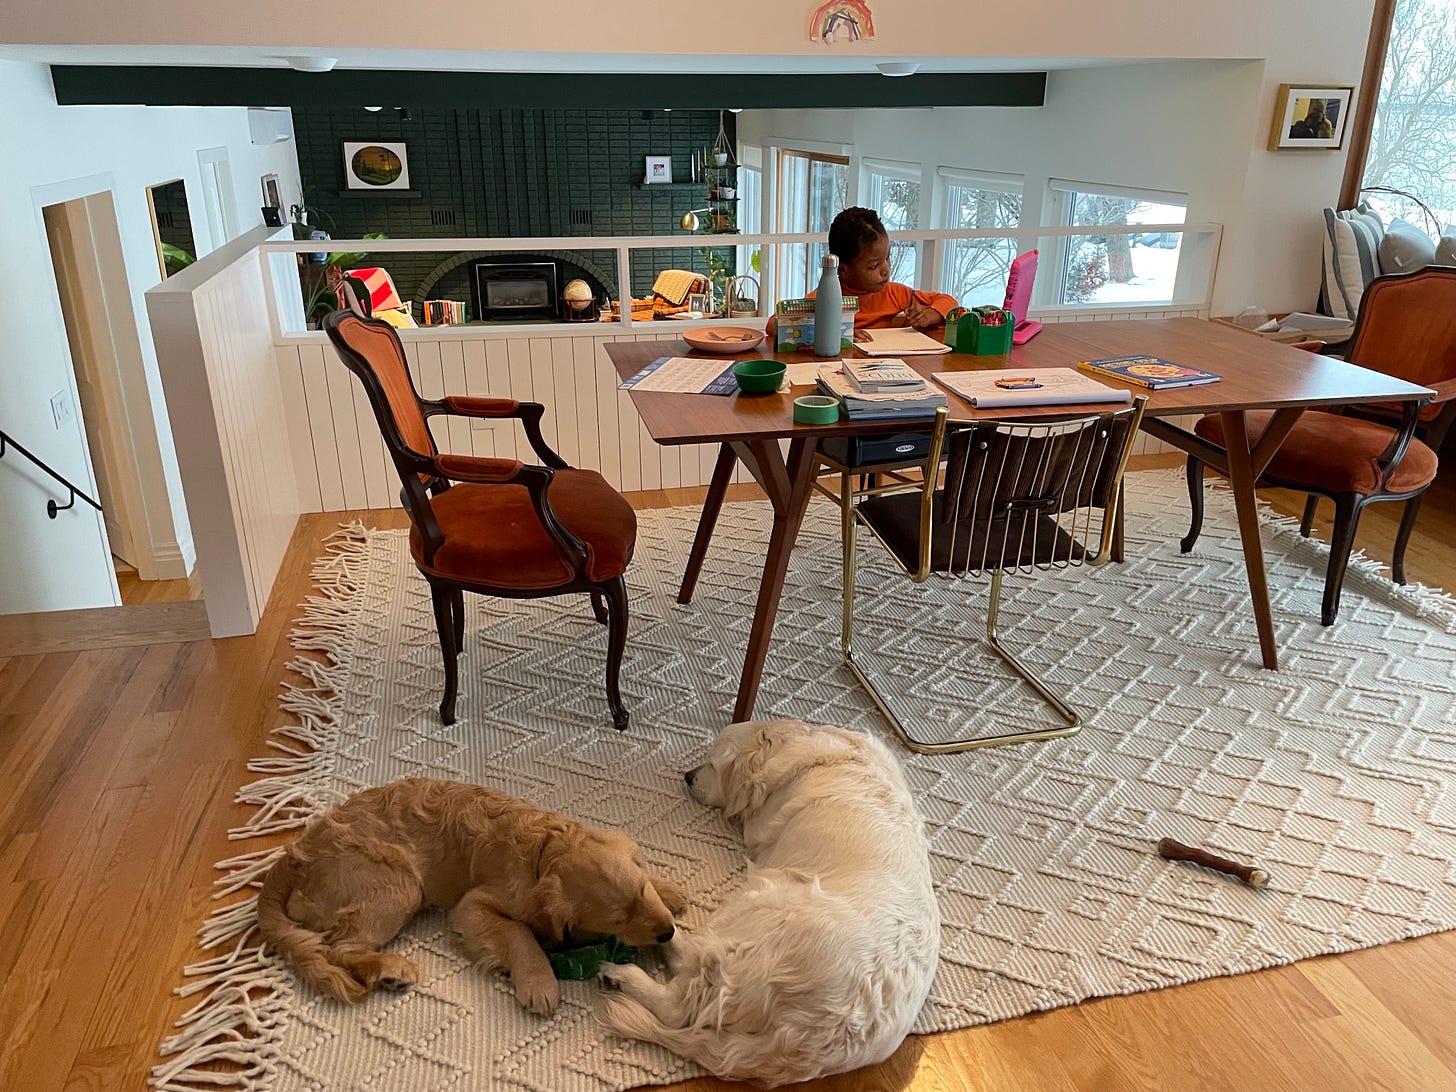 A Black kid in an orange shirt colors while two dogs sleep and play at their feet. 